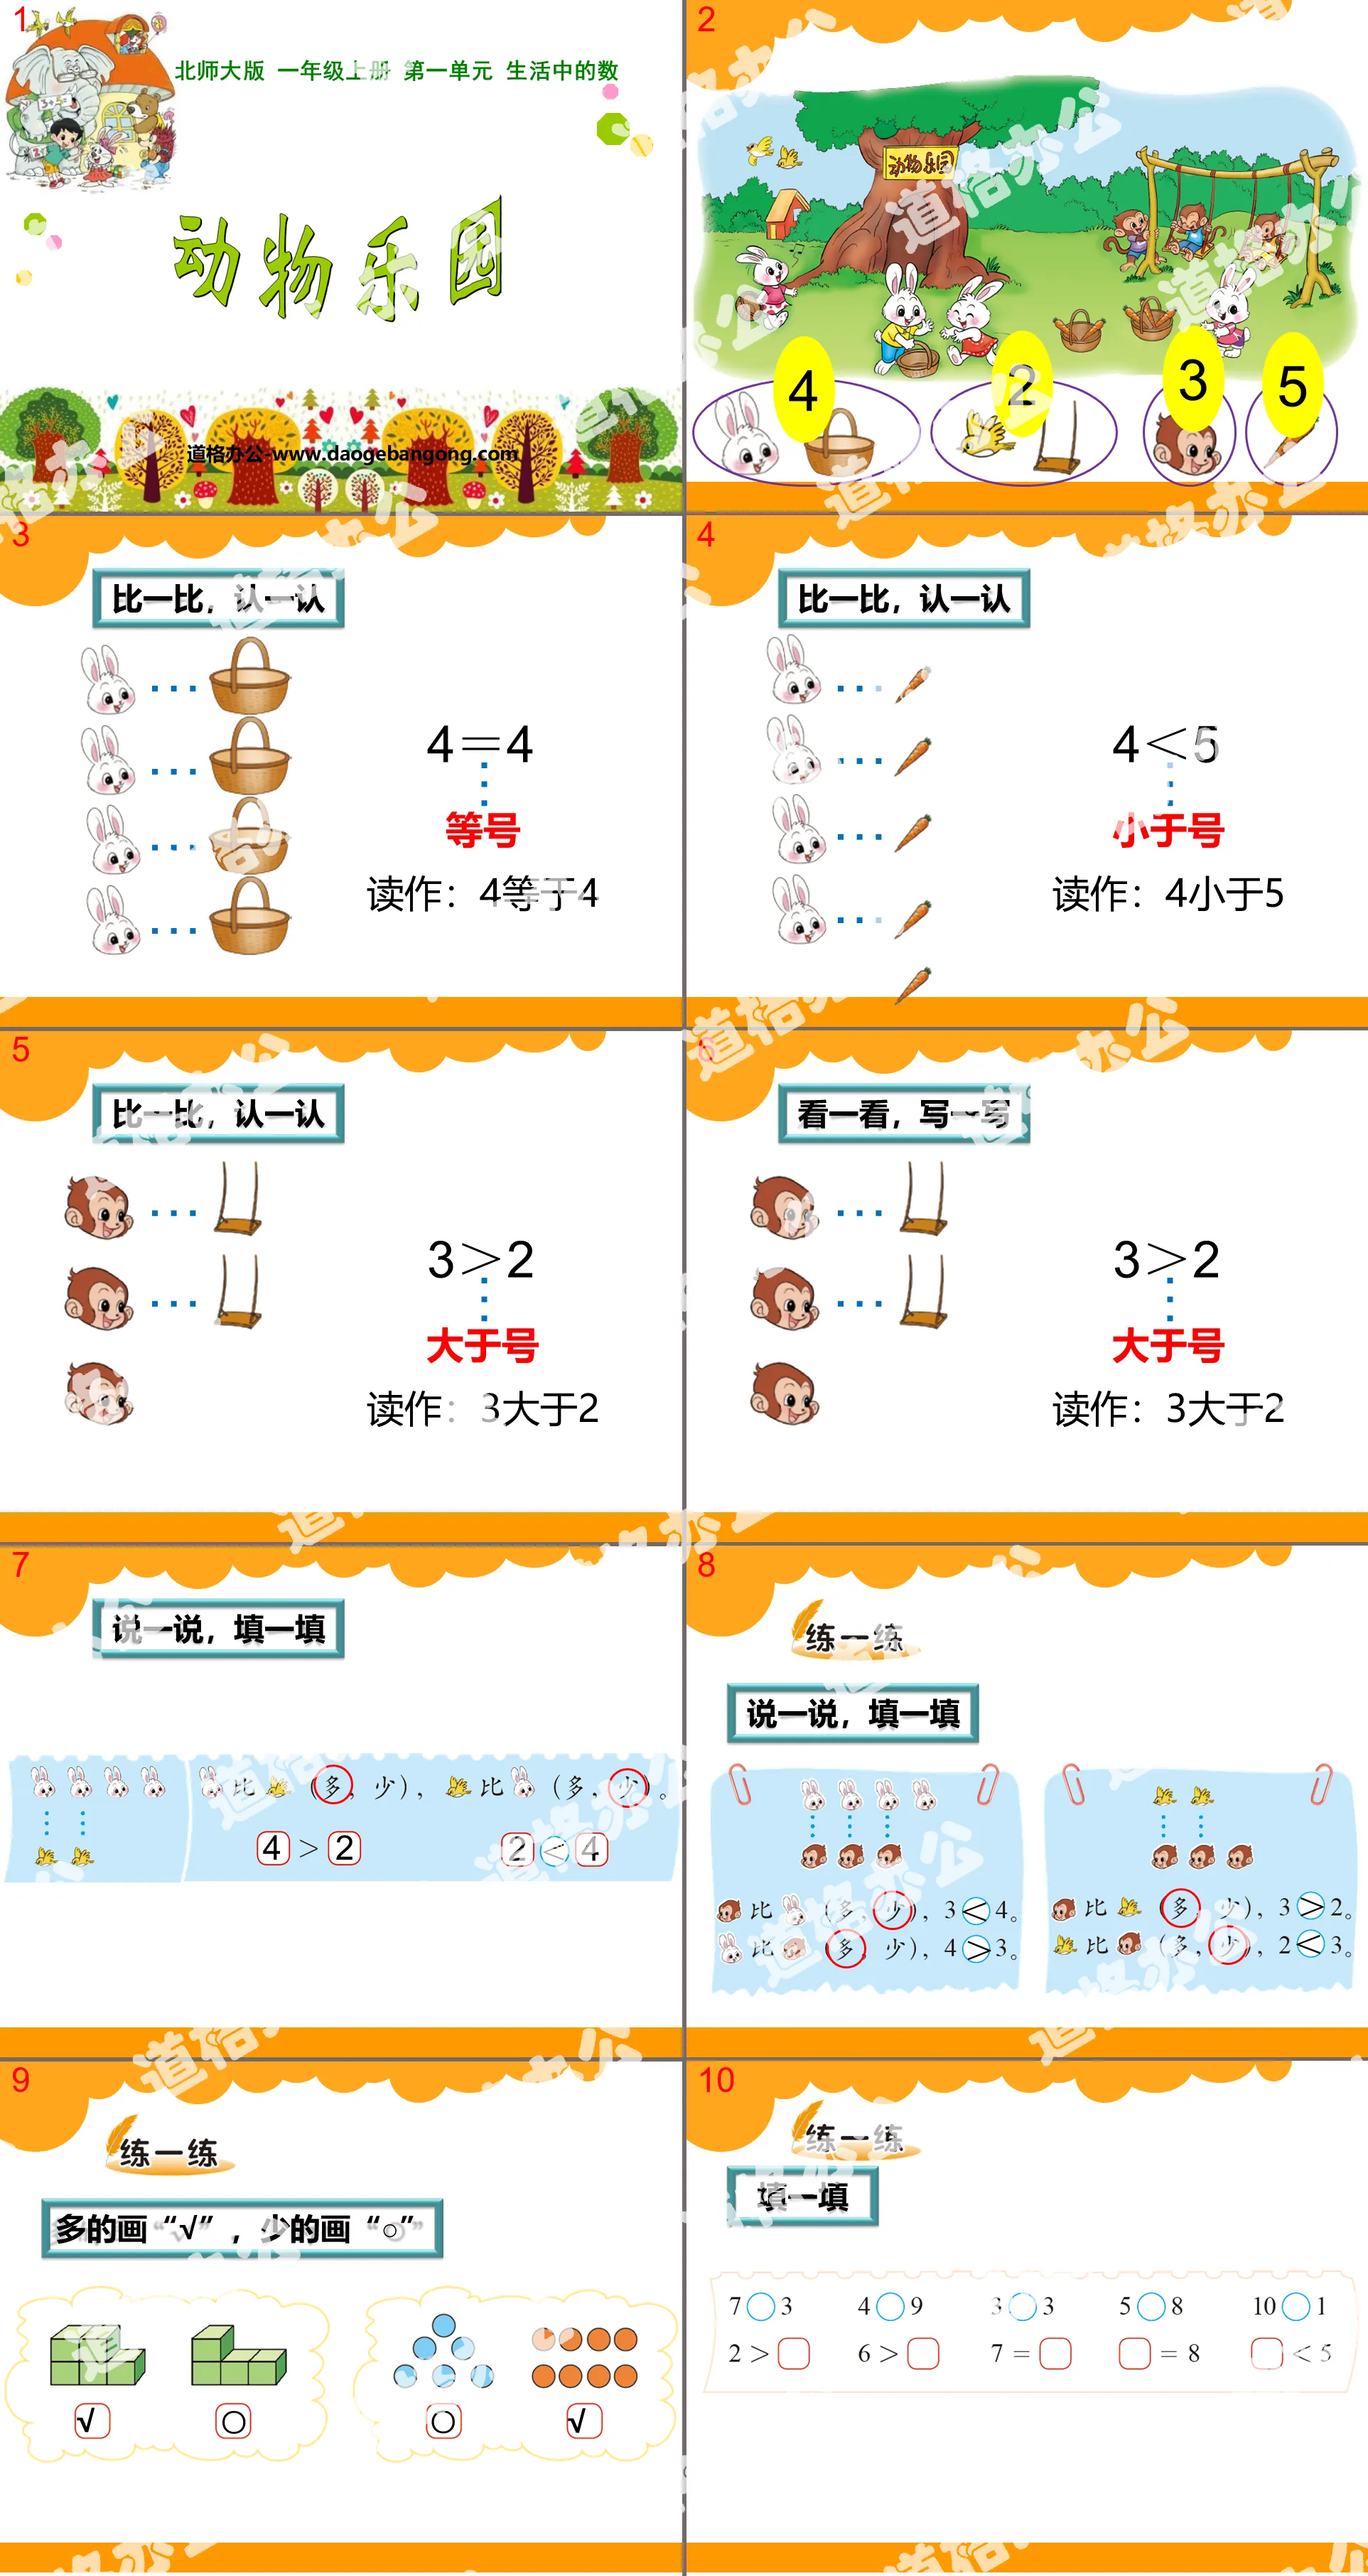 "Animal Paradise" Numbers in Life PPT Courseware 2